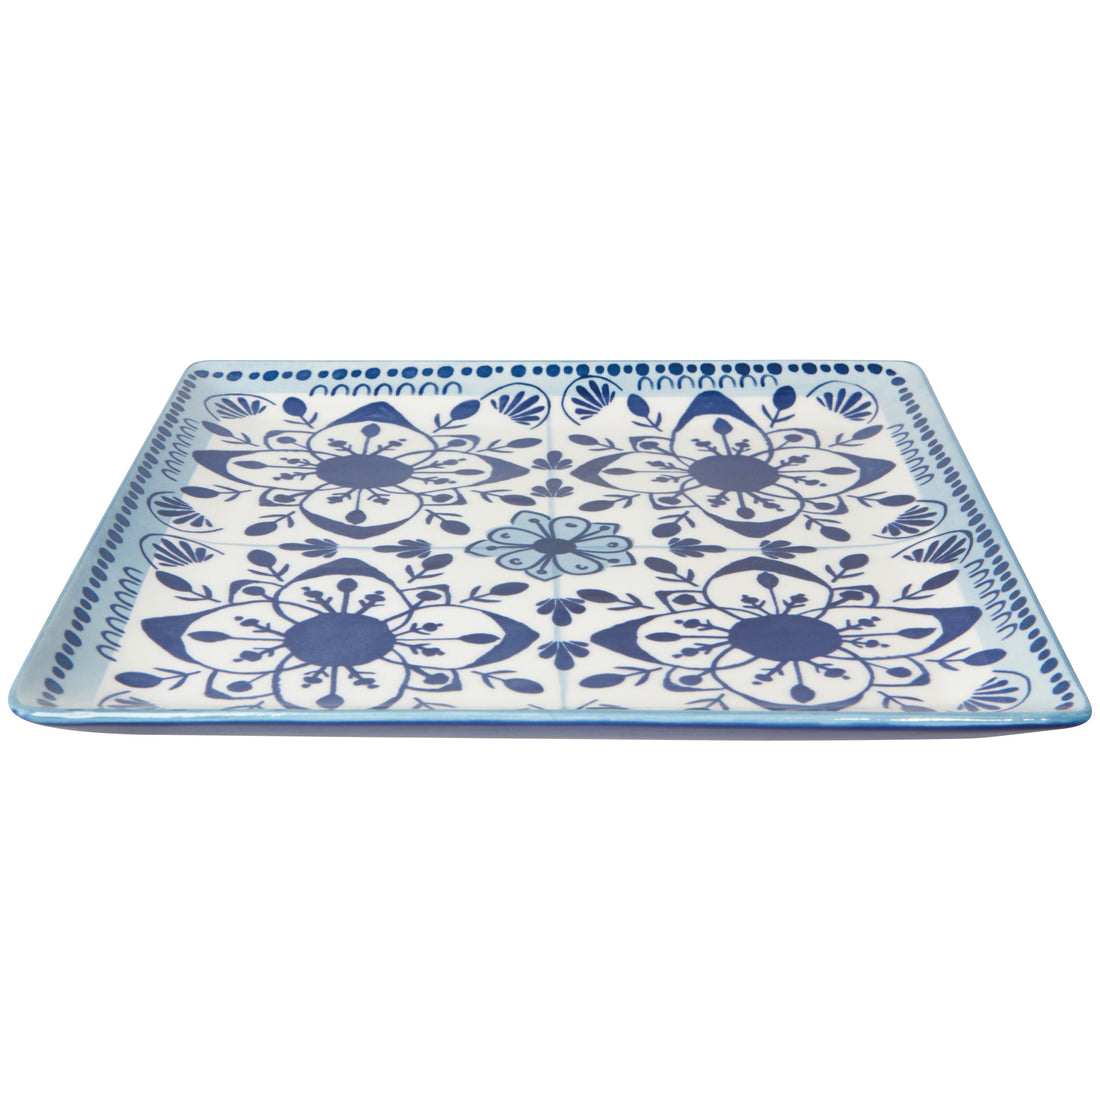 Porto Stamped Plate - Large